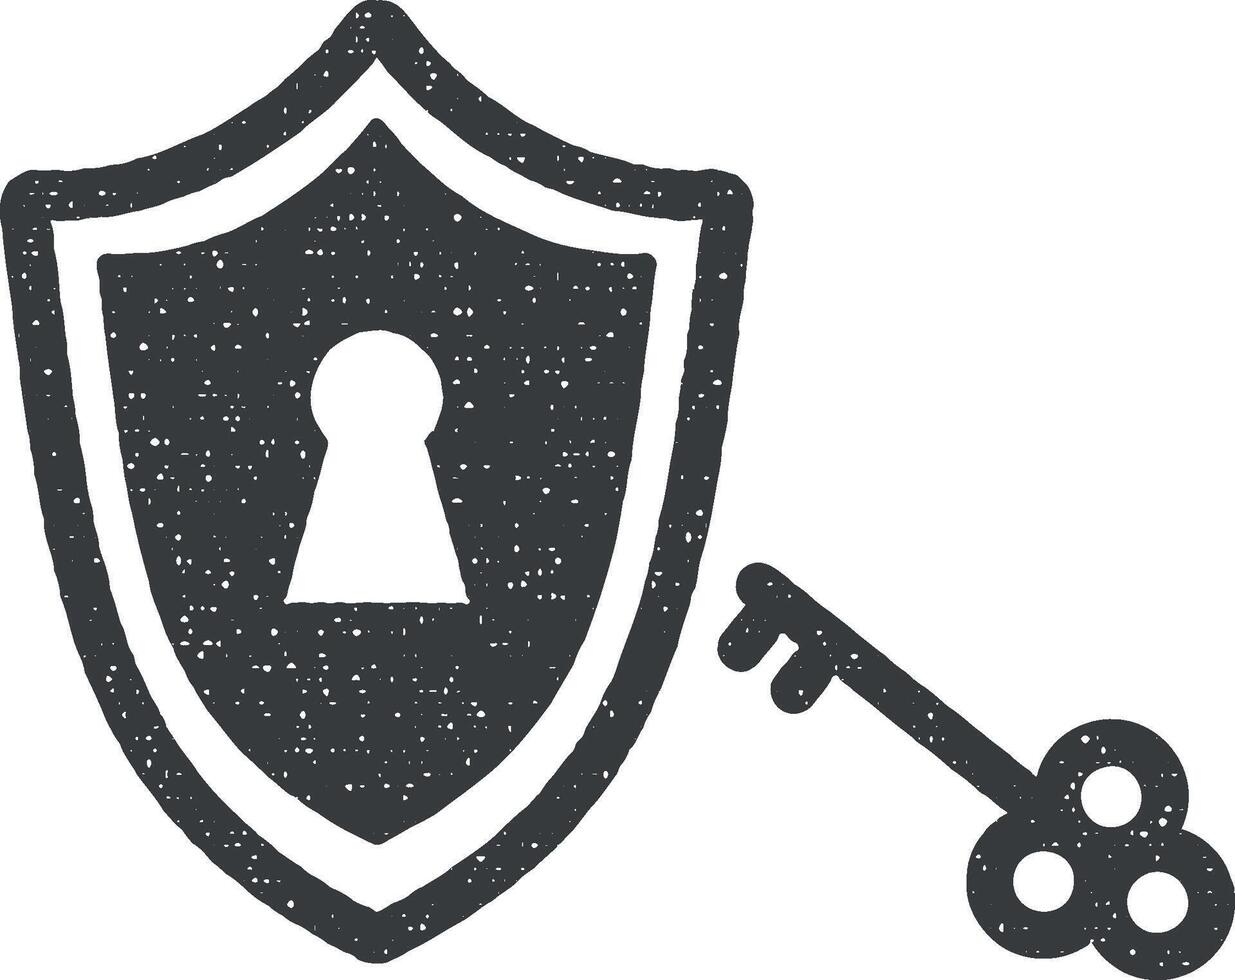 Antivirus shield, passcode, protection unlock, safety lock, security key vector icon illustration with stamp effect